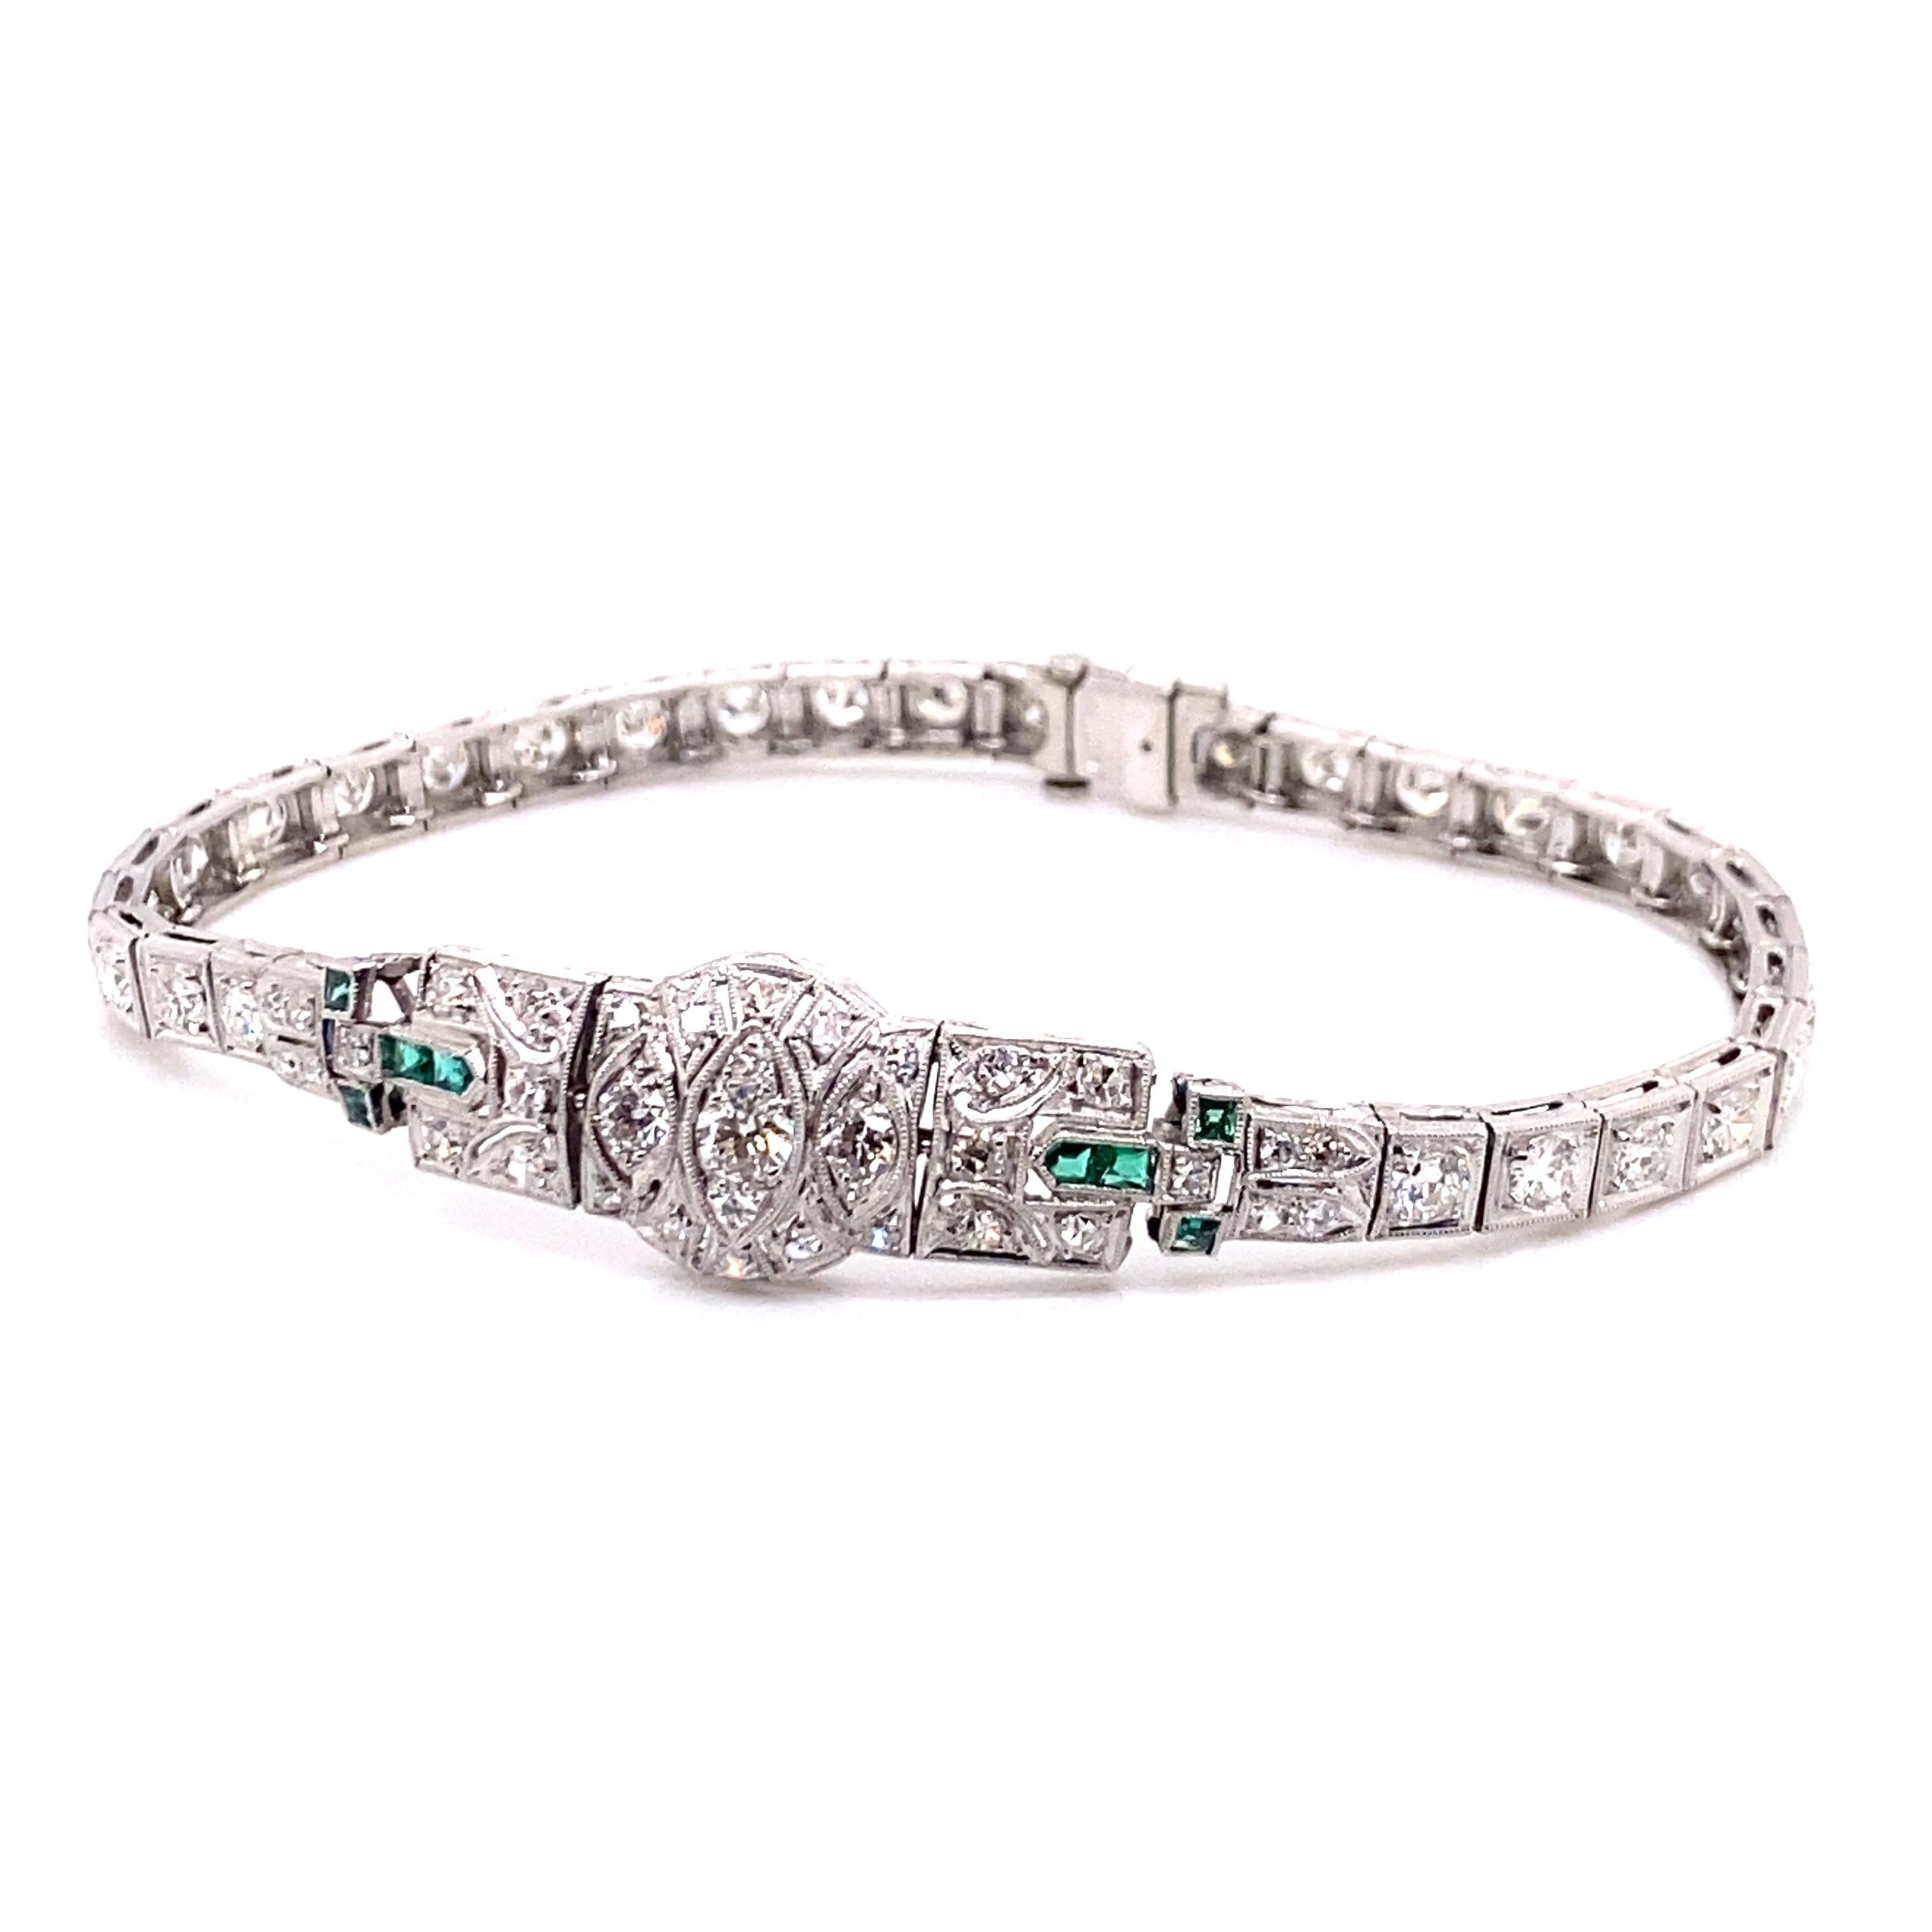 Vintage 1930's Art Deco Platinum Diamond and Emerald Bracelet - The bracelet contains 33 European cut diamonds that weigh approximately 2.50ct, and an additional 32 single cut diamonds that weigh approximately .50ct. The diamond quality is G - I